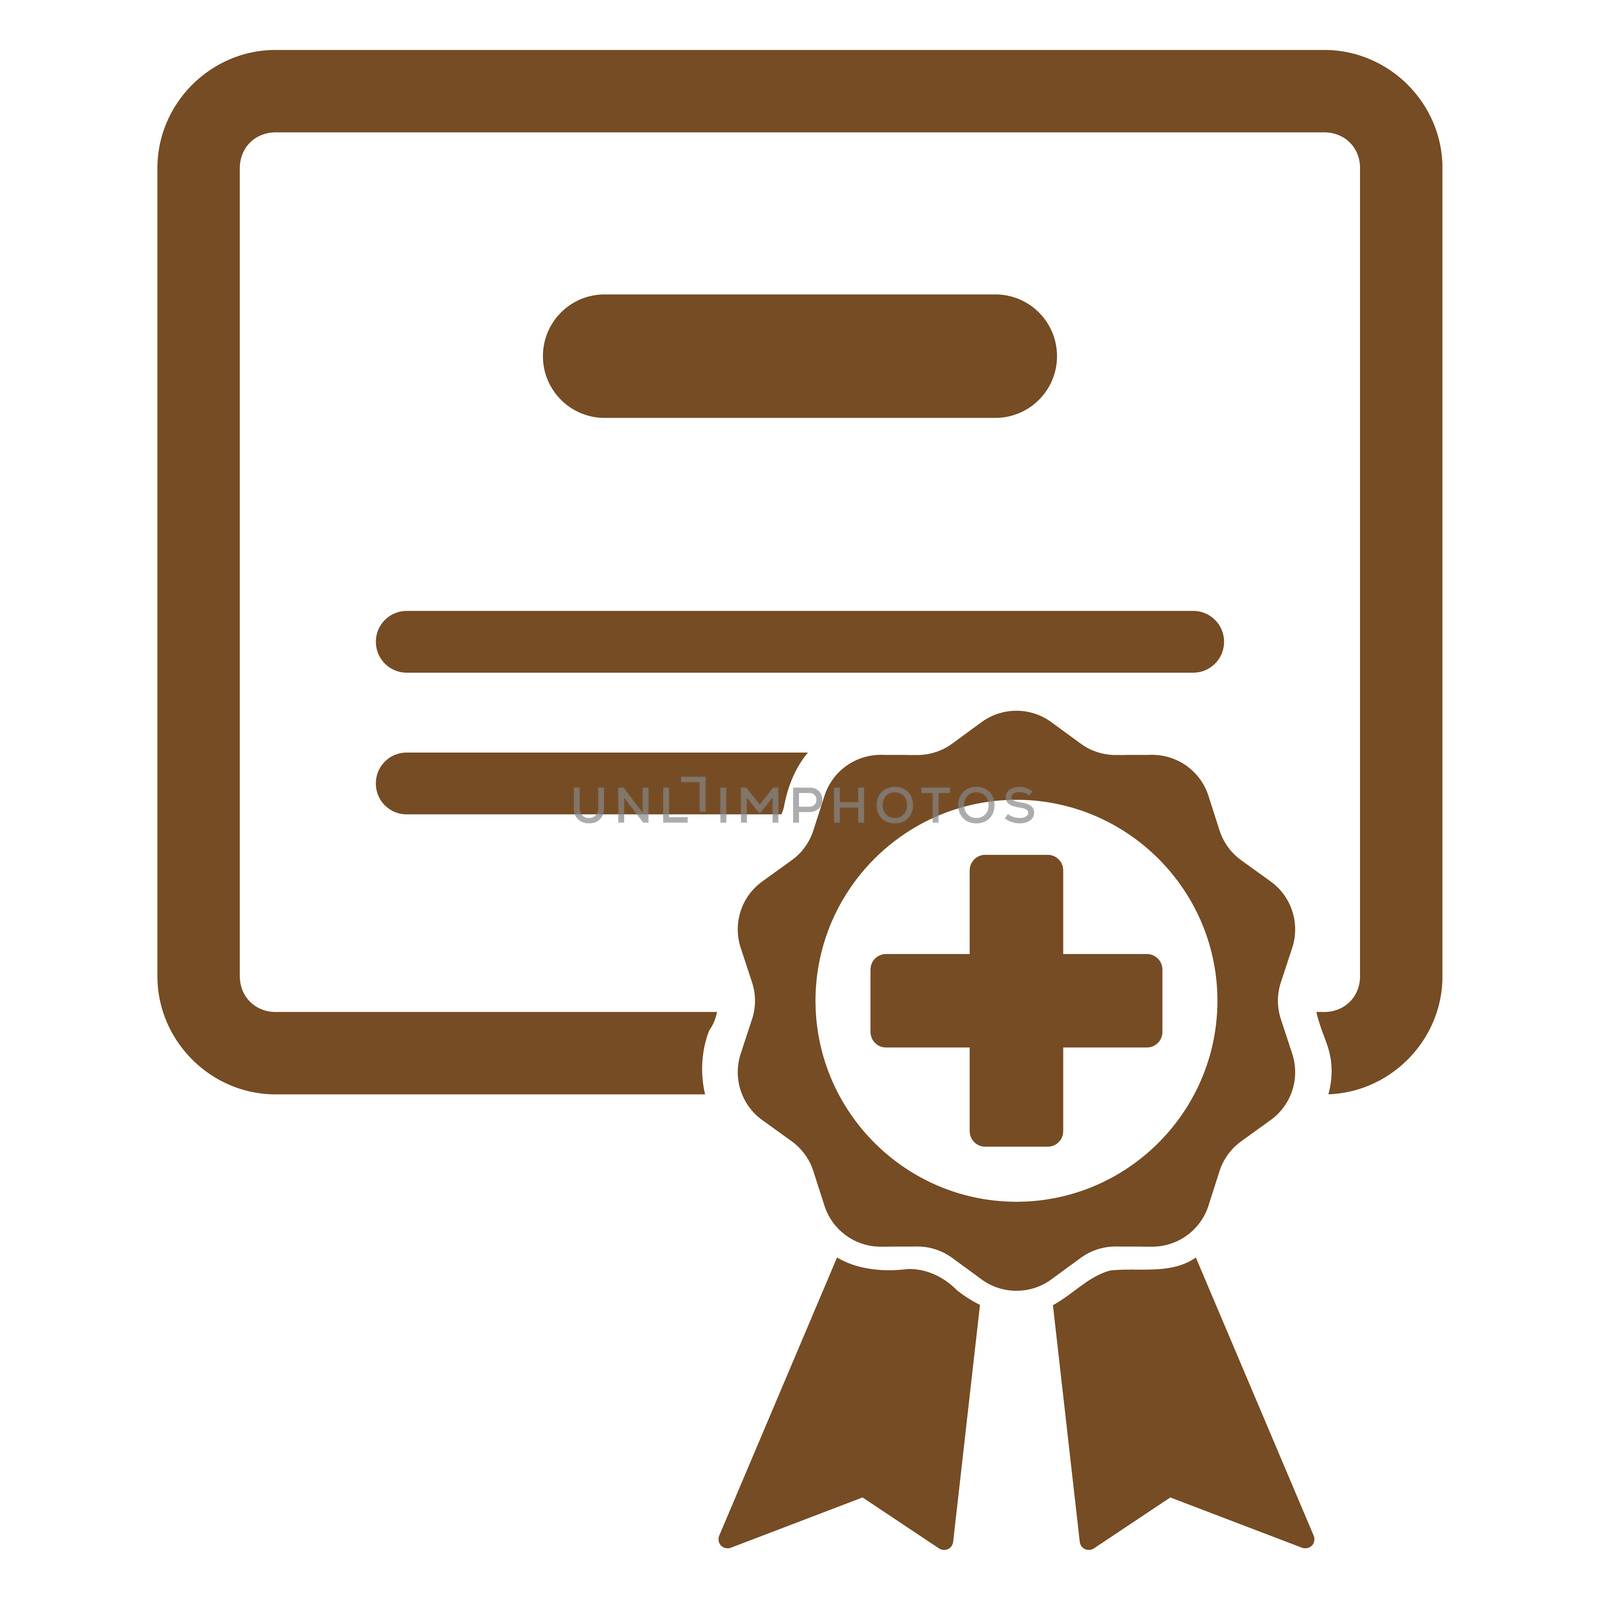 Medical Certificate raster icon. Style is flat symbol, brown color, rounded angles, white background.